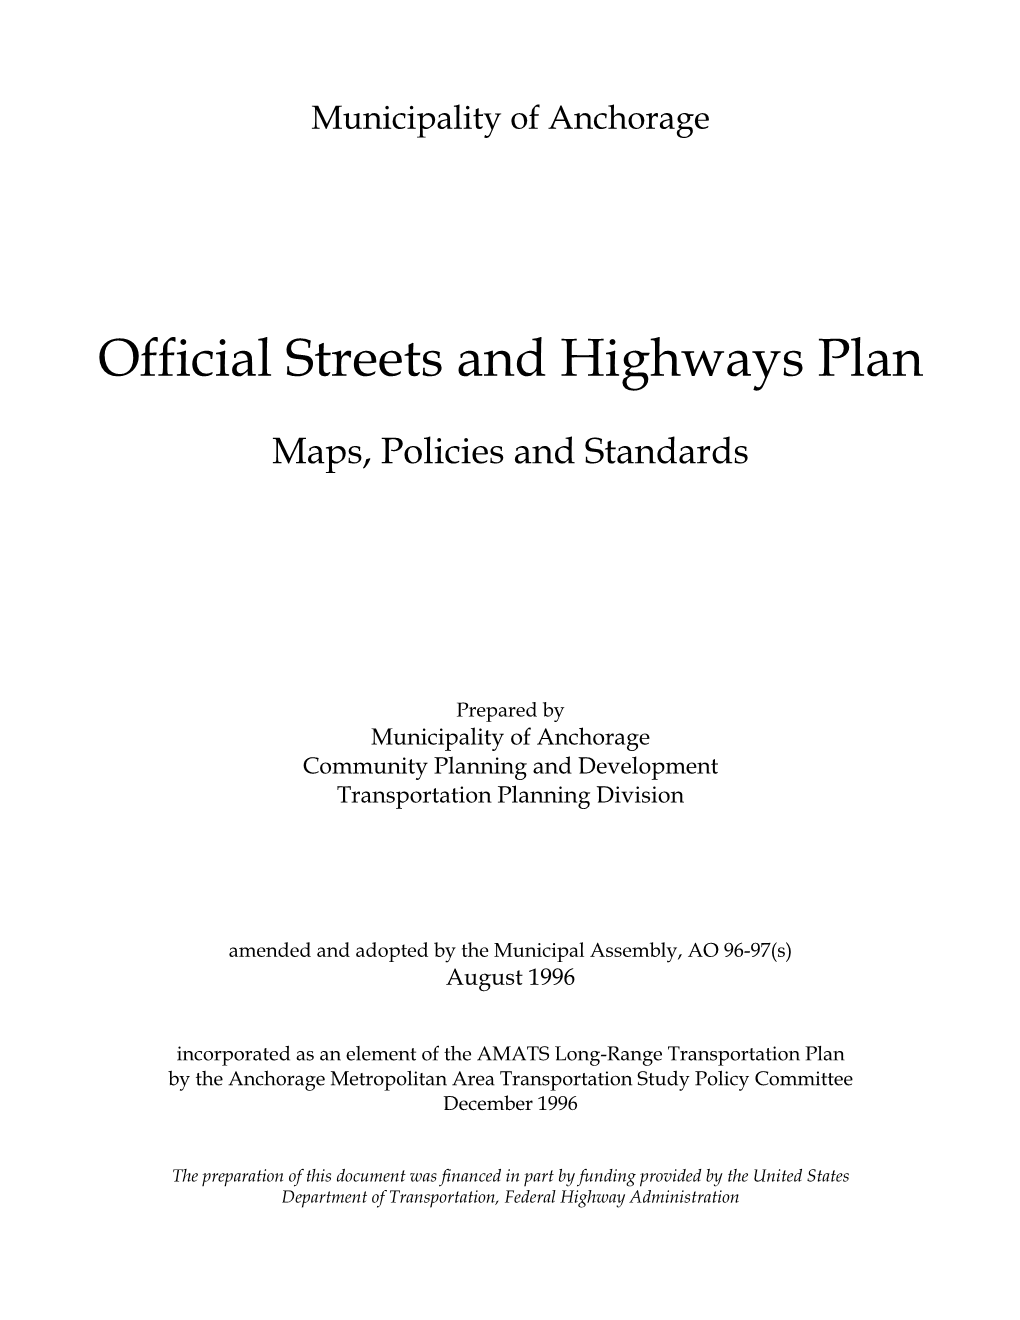 Official Streets and Highways Plan